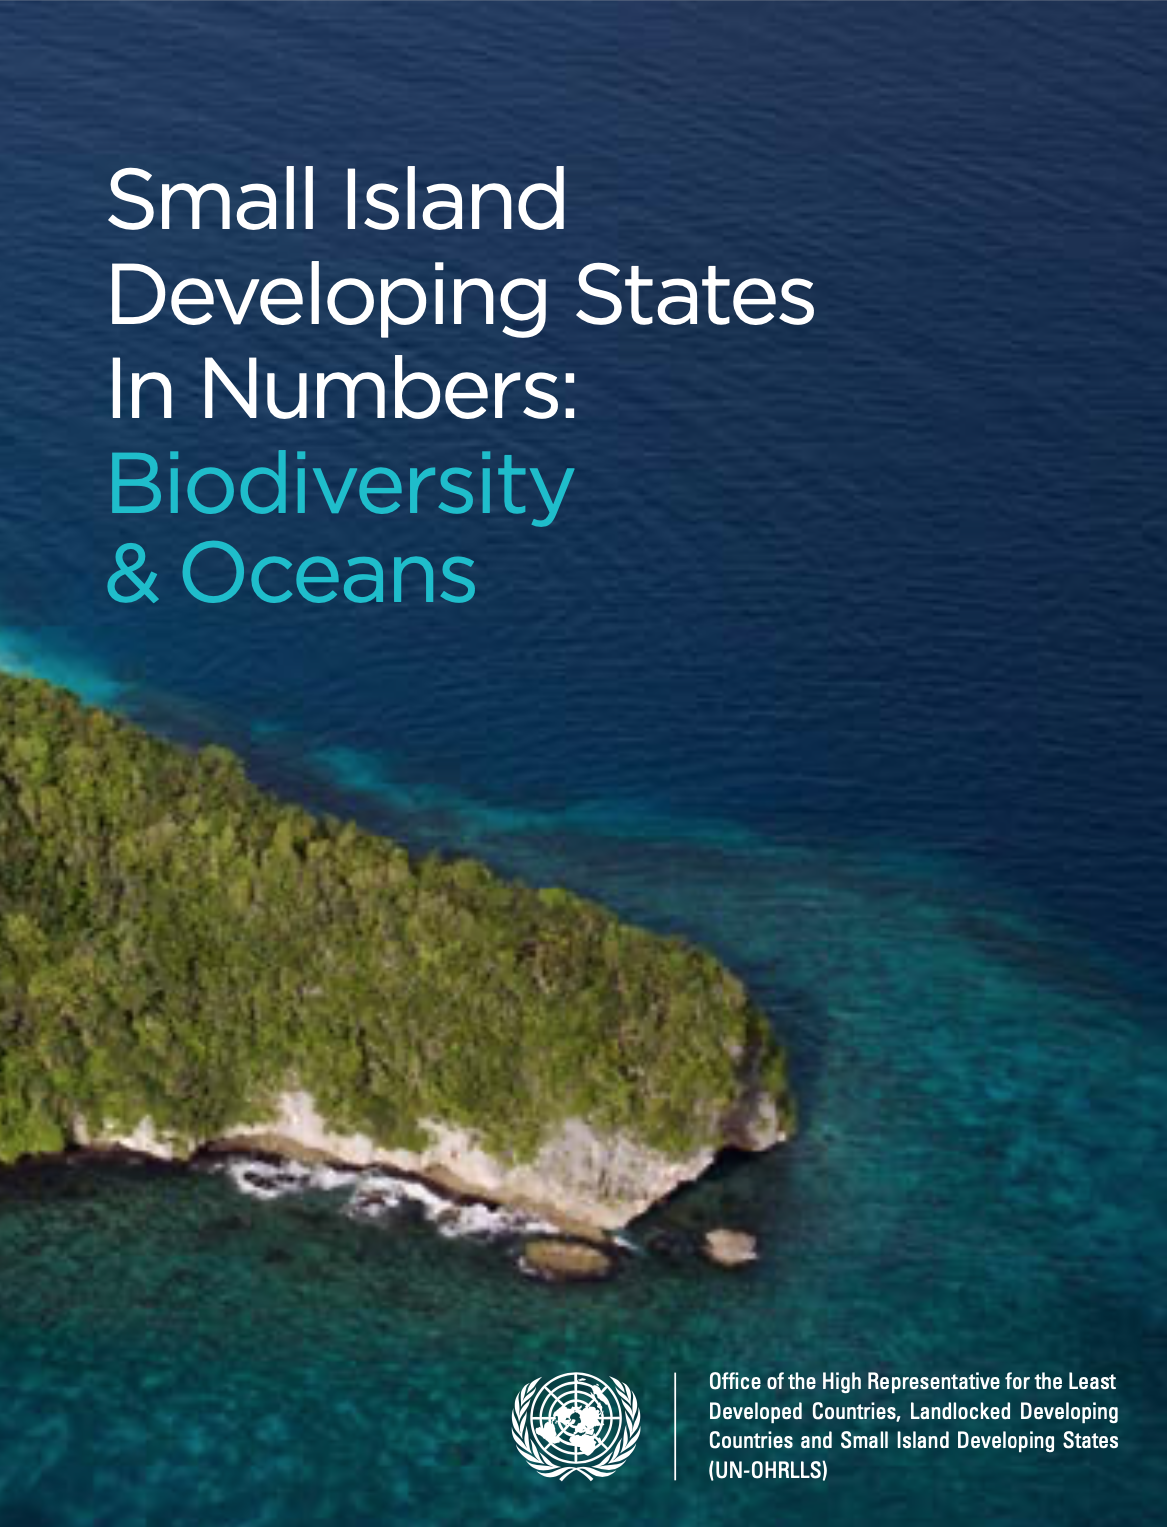 Cover of Small Island Developing States In Numbers: Biodiversity & Oceans (2017)